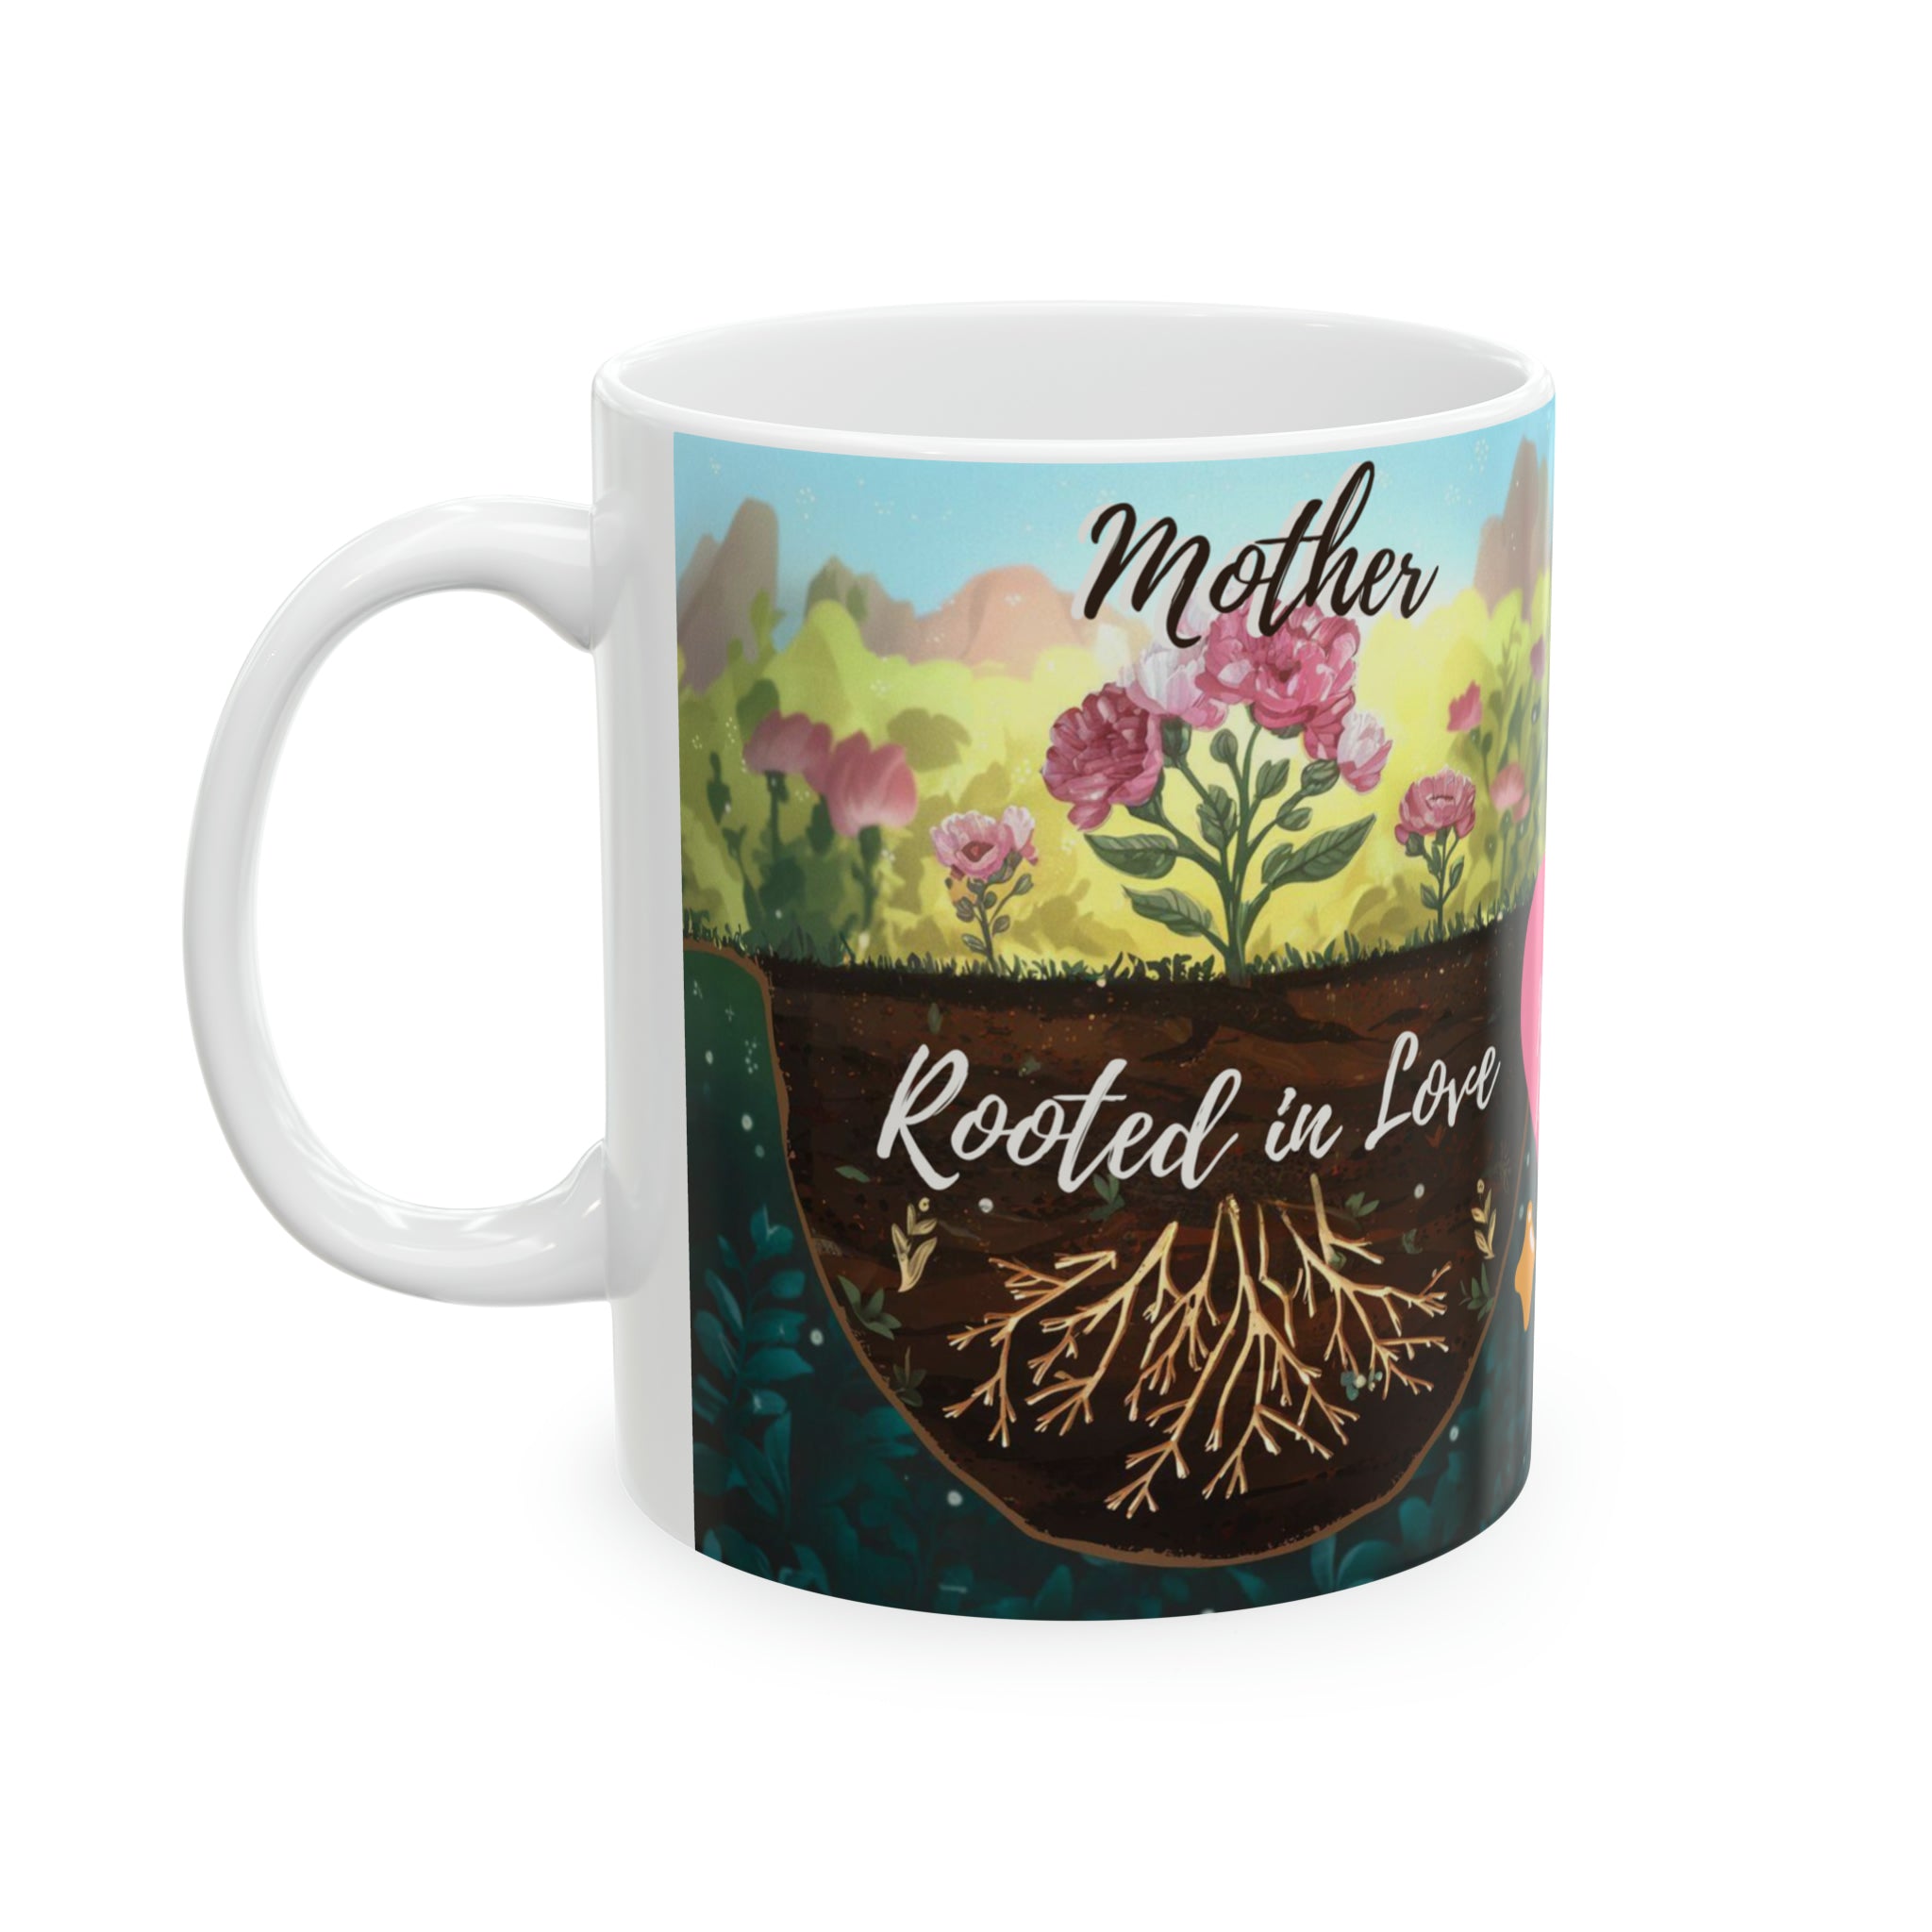 Mother, Rooted in Love - Ceramic Mug, 11oz